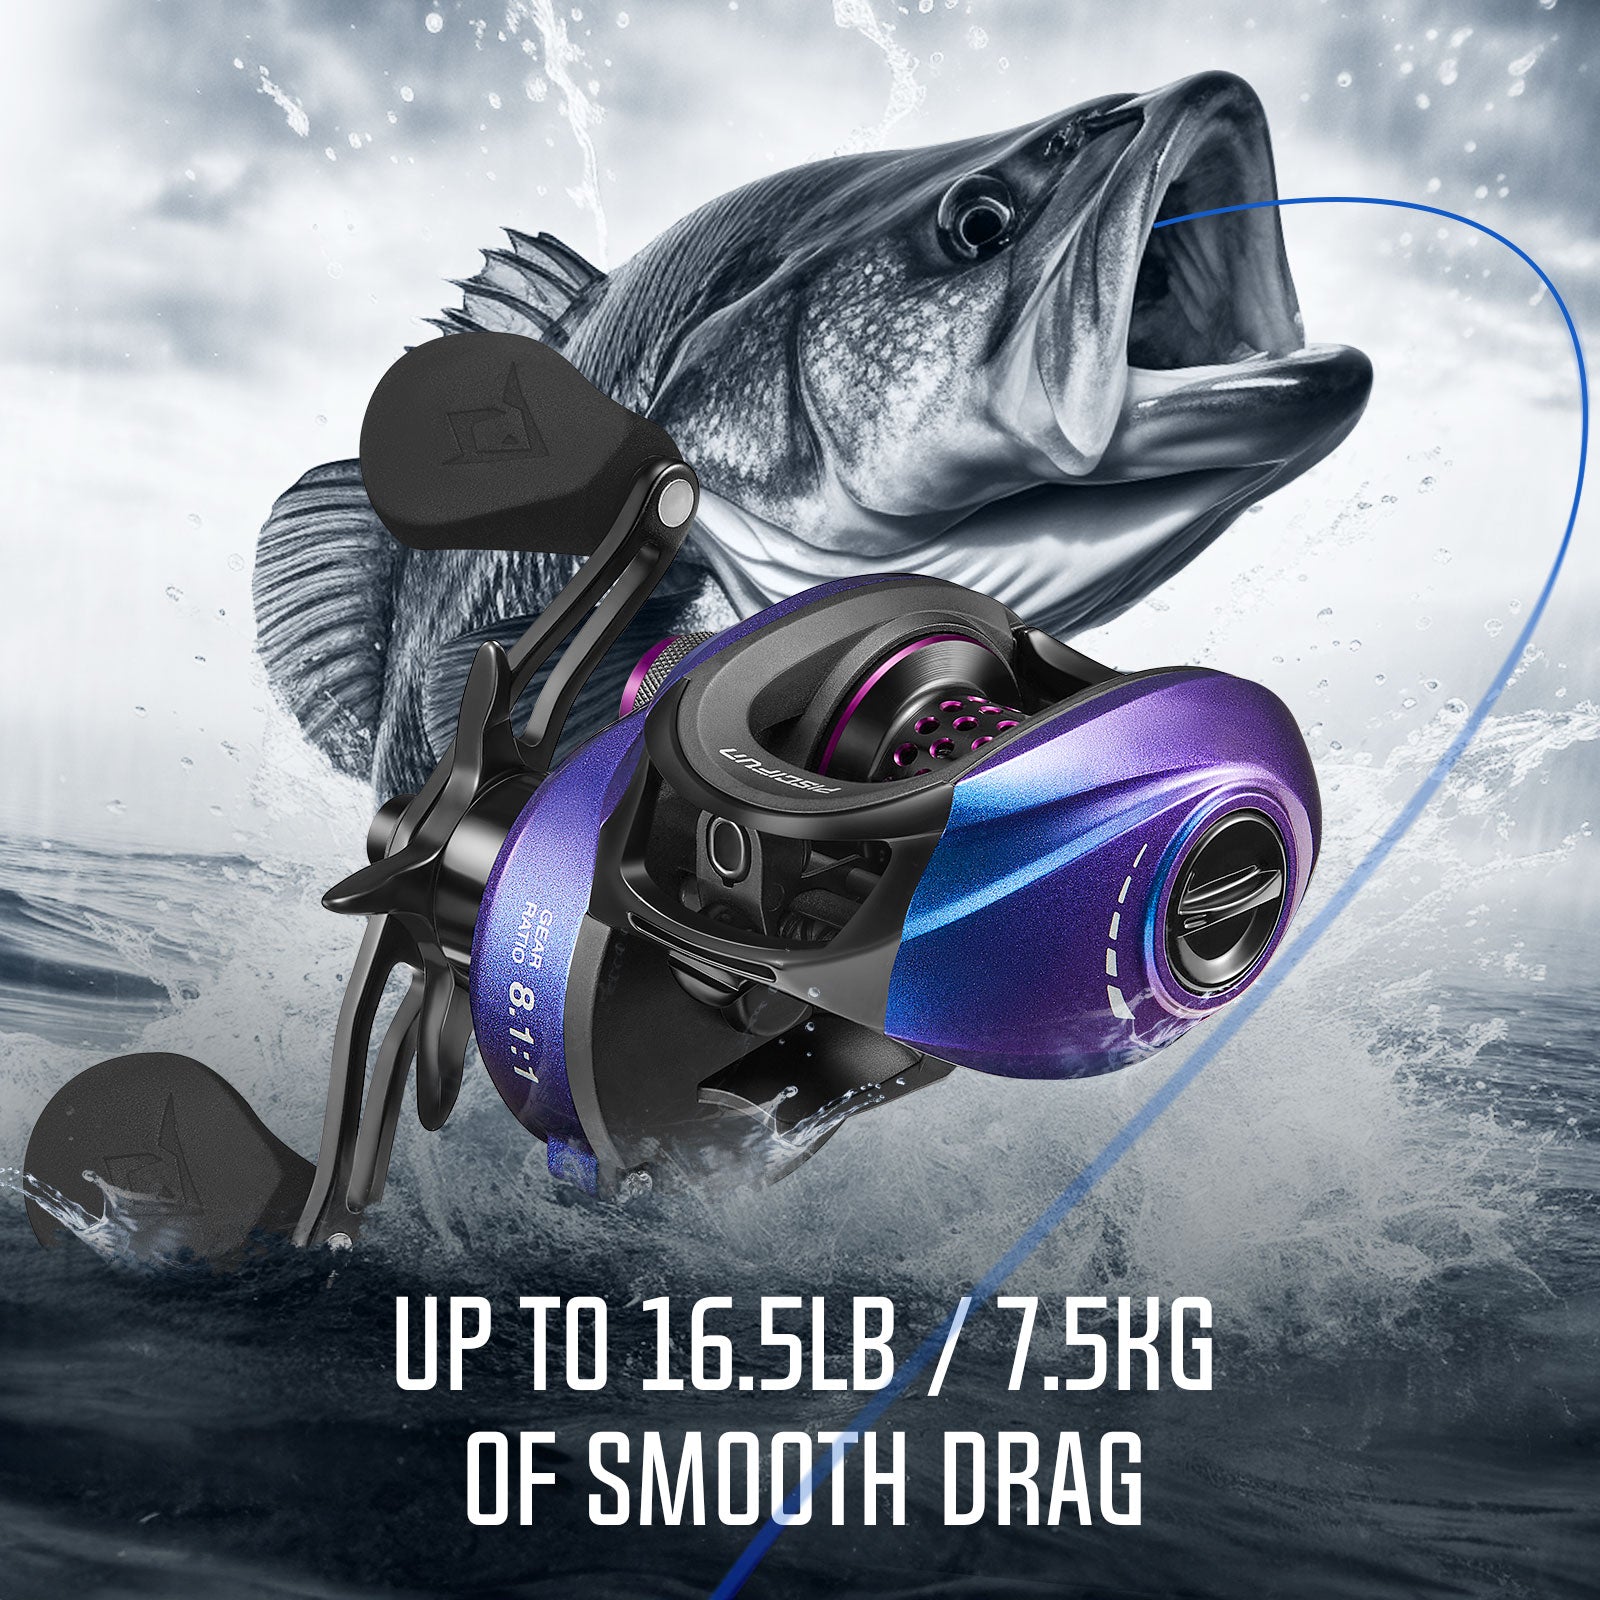 Brand New SPARK and SPARK PRO Casting Reel, Piscifun